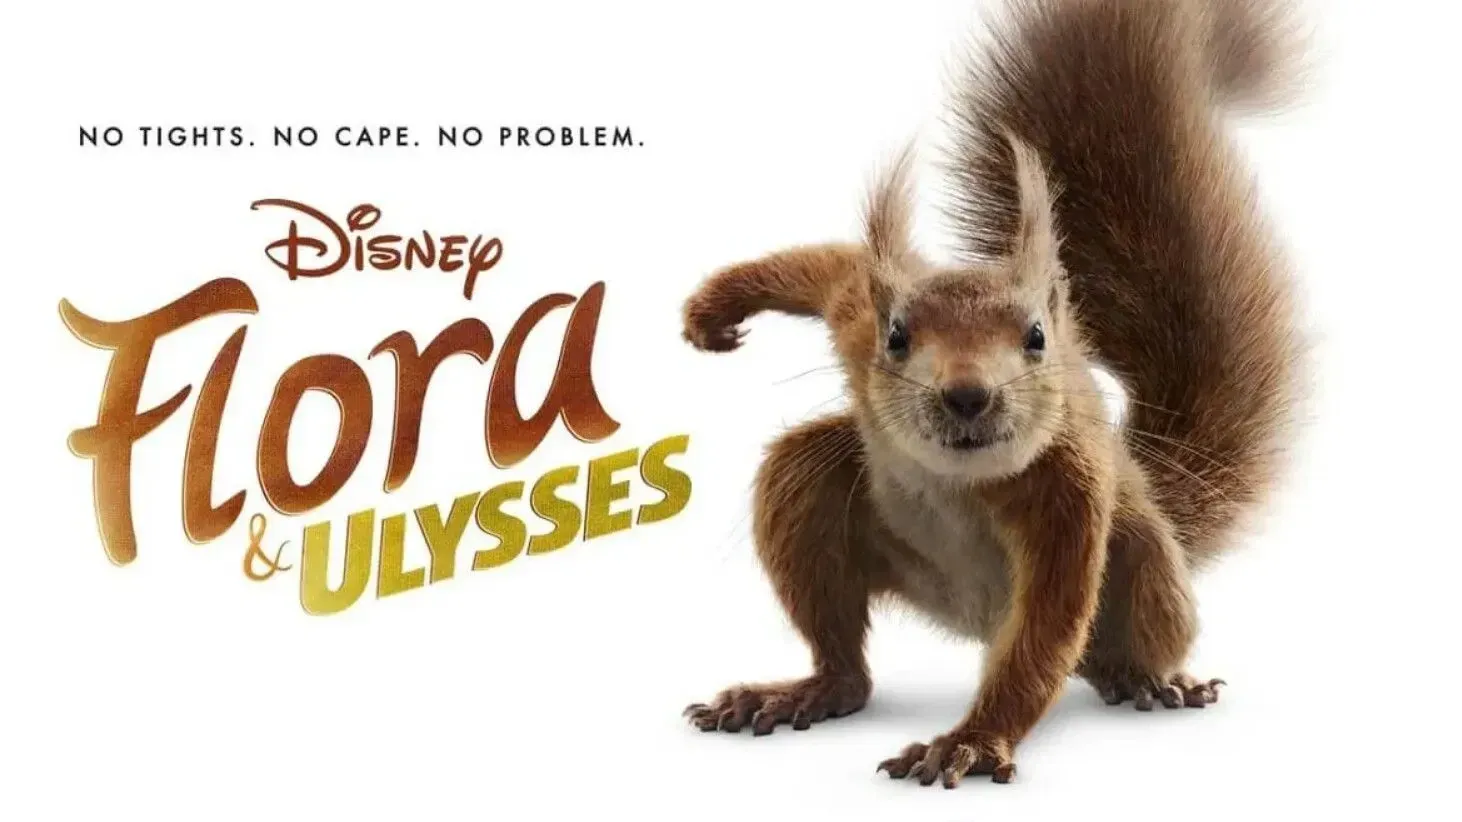 Disney’s new feature film unites a 10-year-old girl and a magical squirrel for nutty adventures.